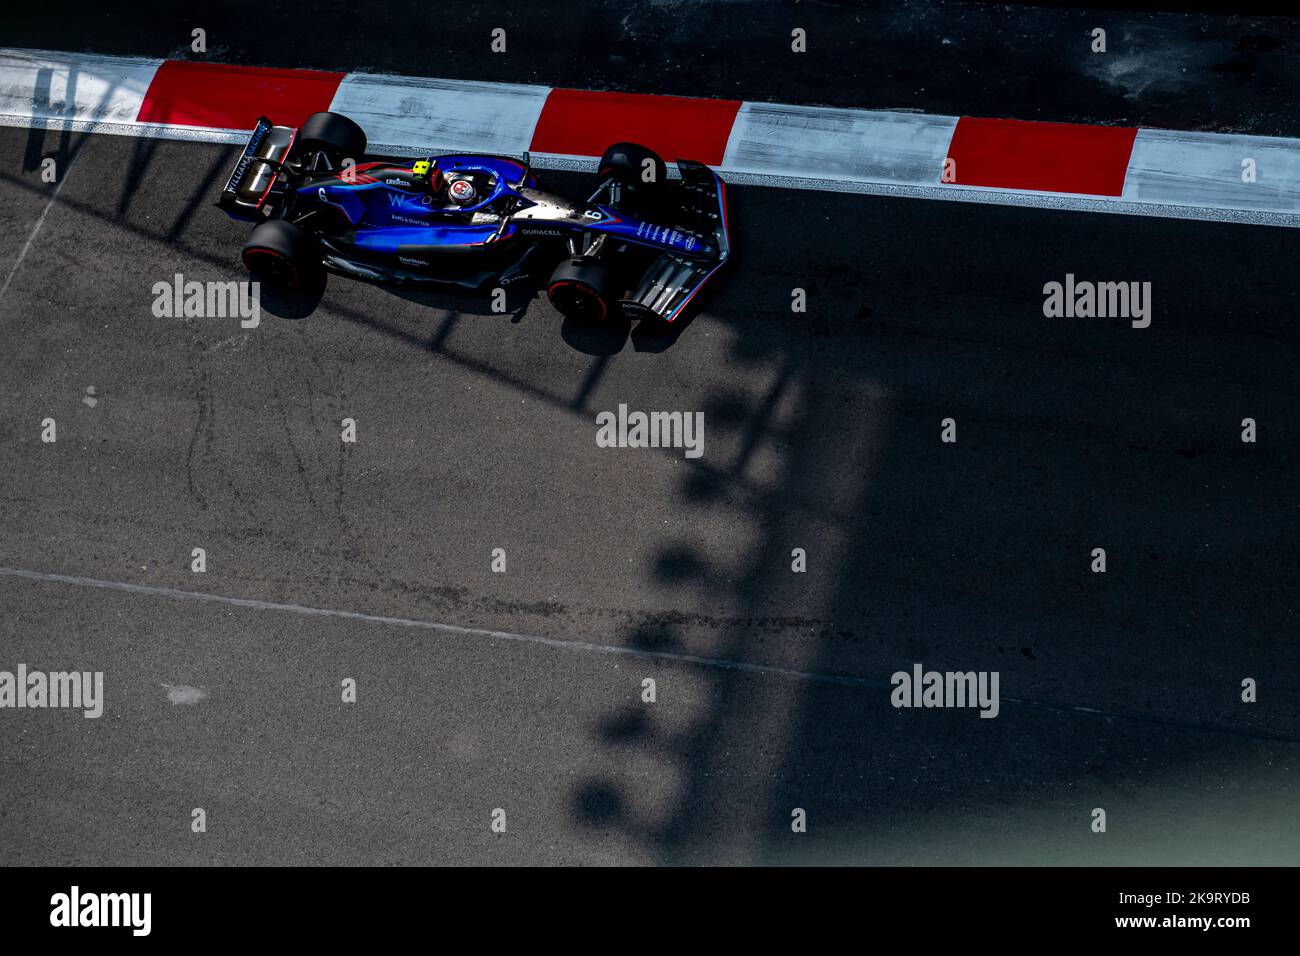 Mexico City, Mexico, 30th Oct 2022, Nicholas Latifi, from Canada competes for Williams Racing. Qualifying, round 20 of the 2022 Formula 1 championship. Credit: Michael Potts/Alamy Live News Stock Photo